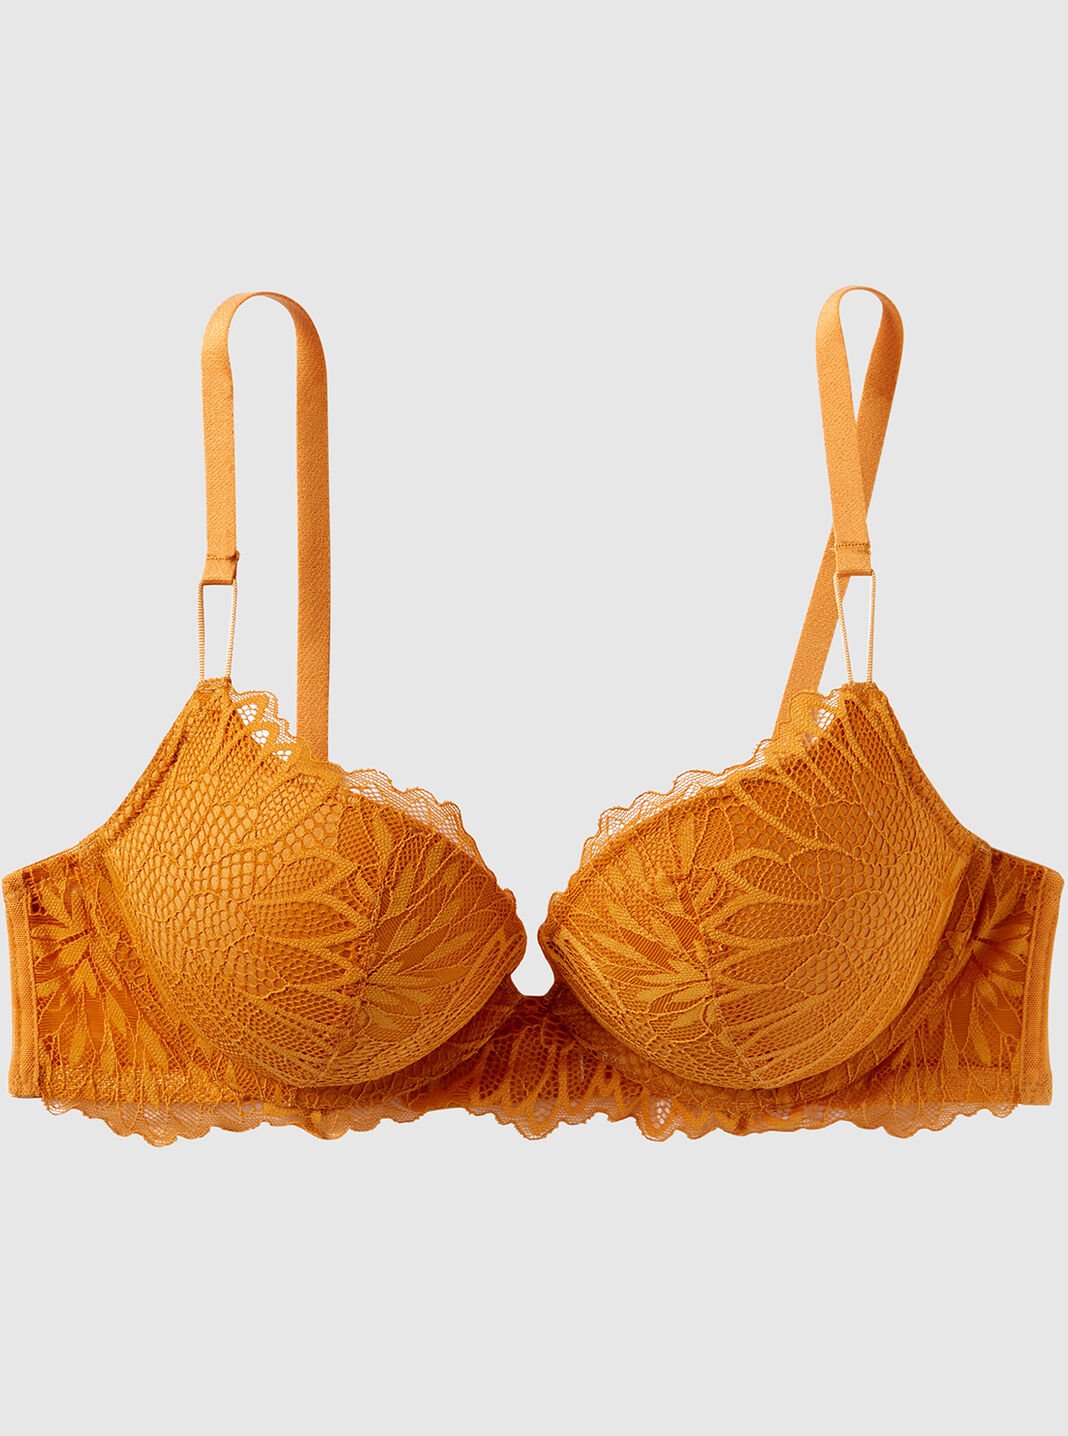 shop now yellow bridal bra panty at prestitia.for more visit